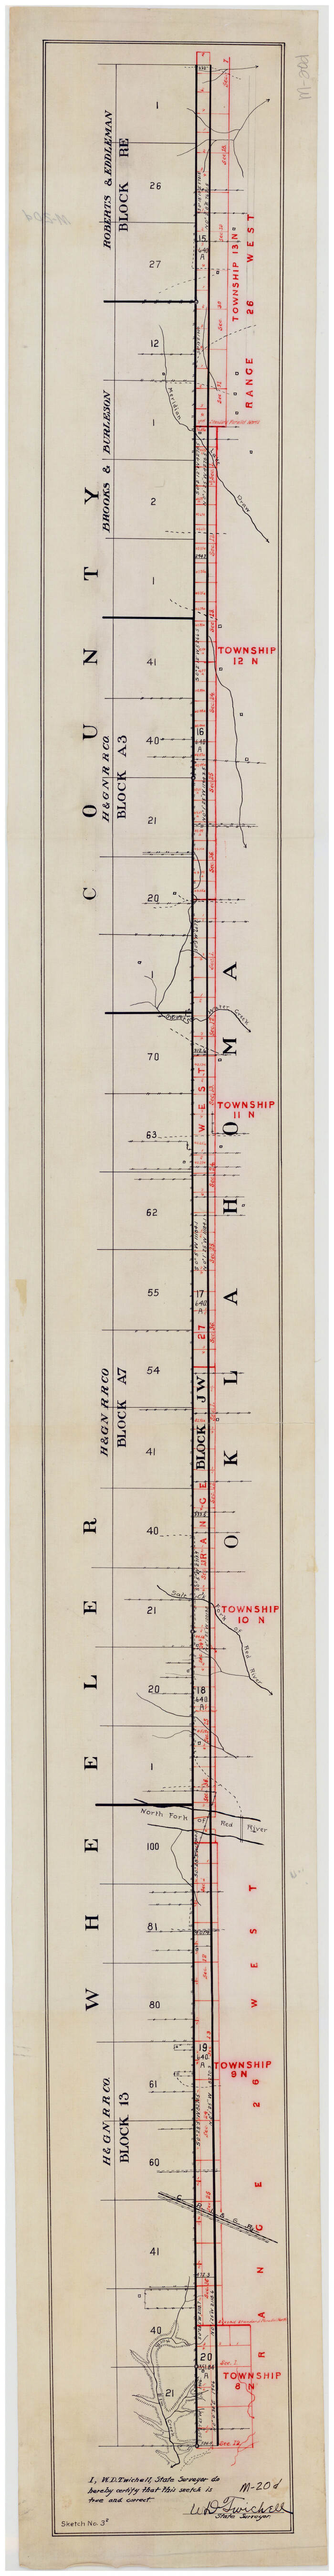 89665, [Sketch Between Wheeler County and Oklahoma], Twichell Survey Records